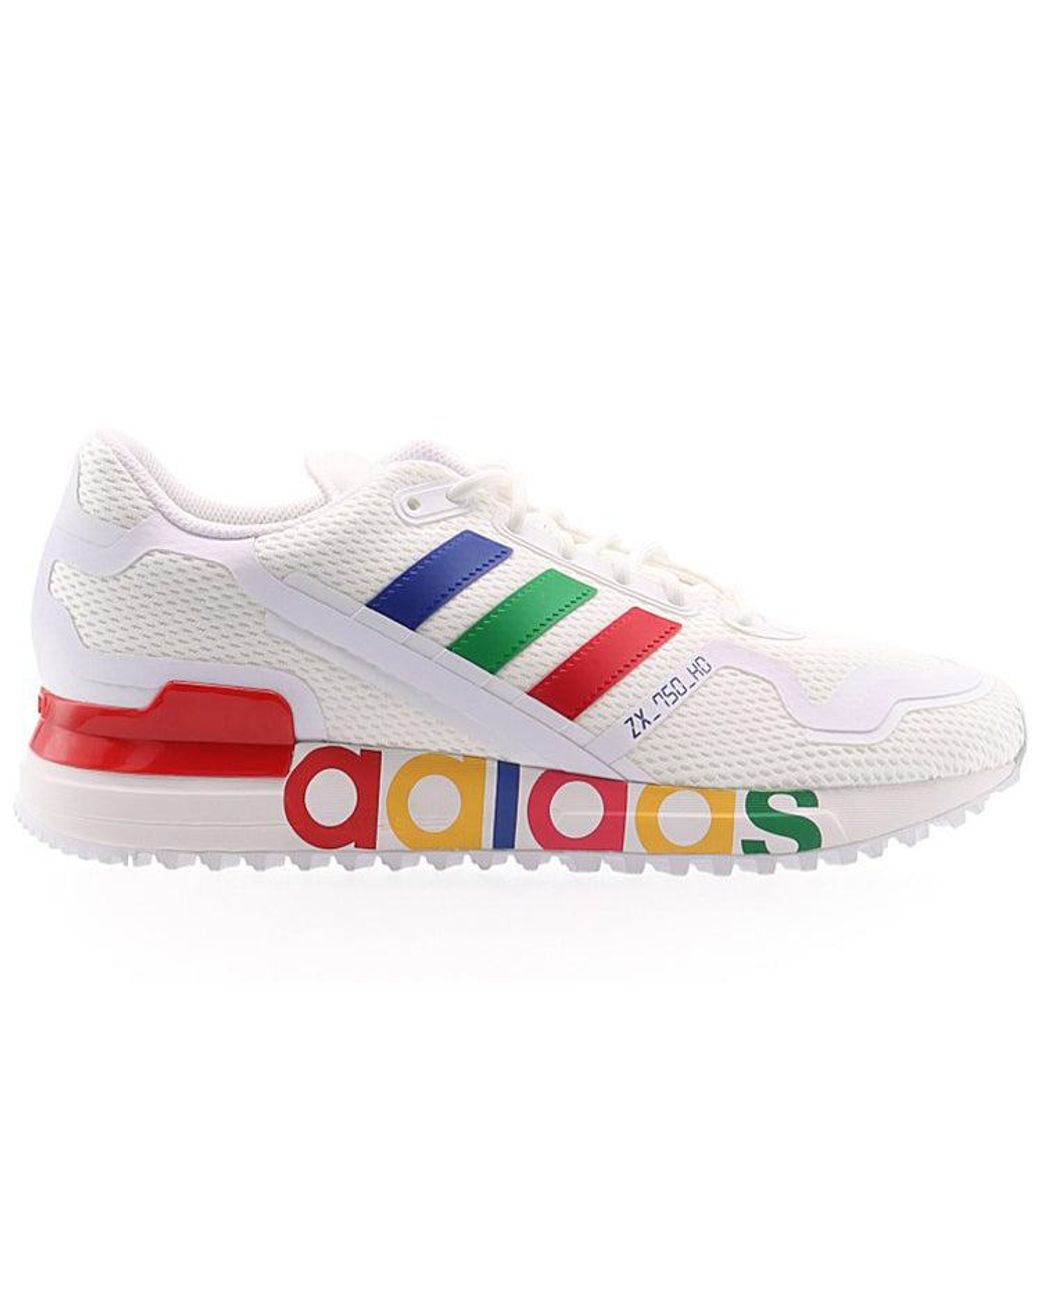 adidas Originals Zx 750 Hd Olympic Pack in White for Men | Lyst